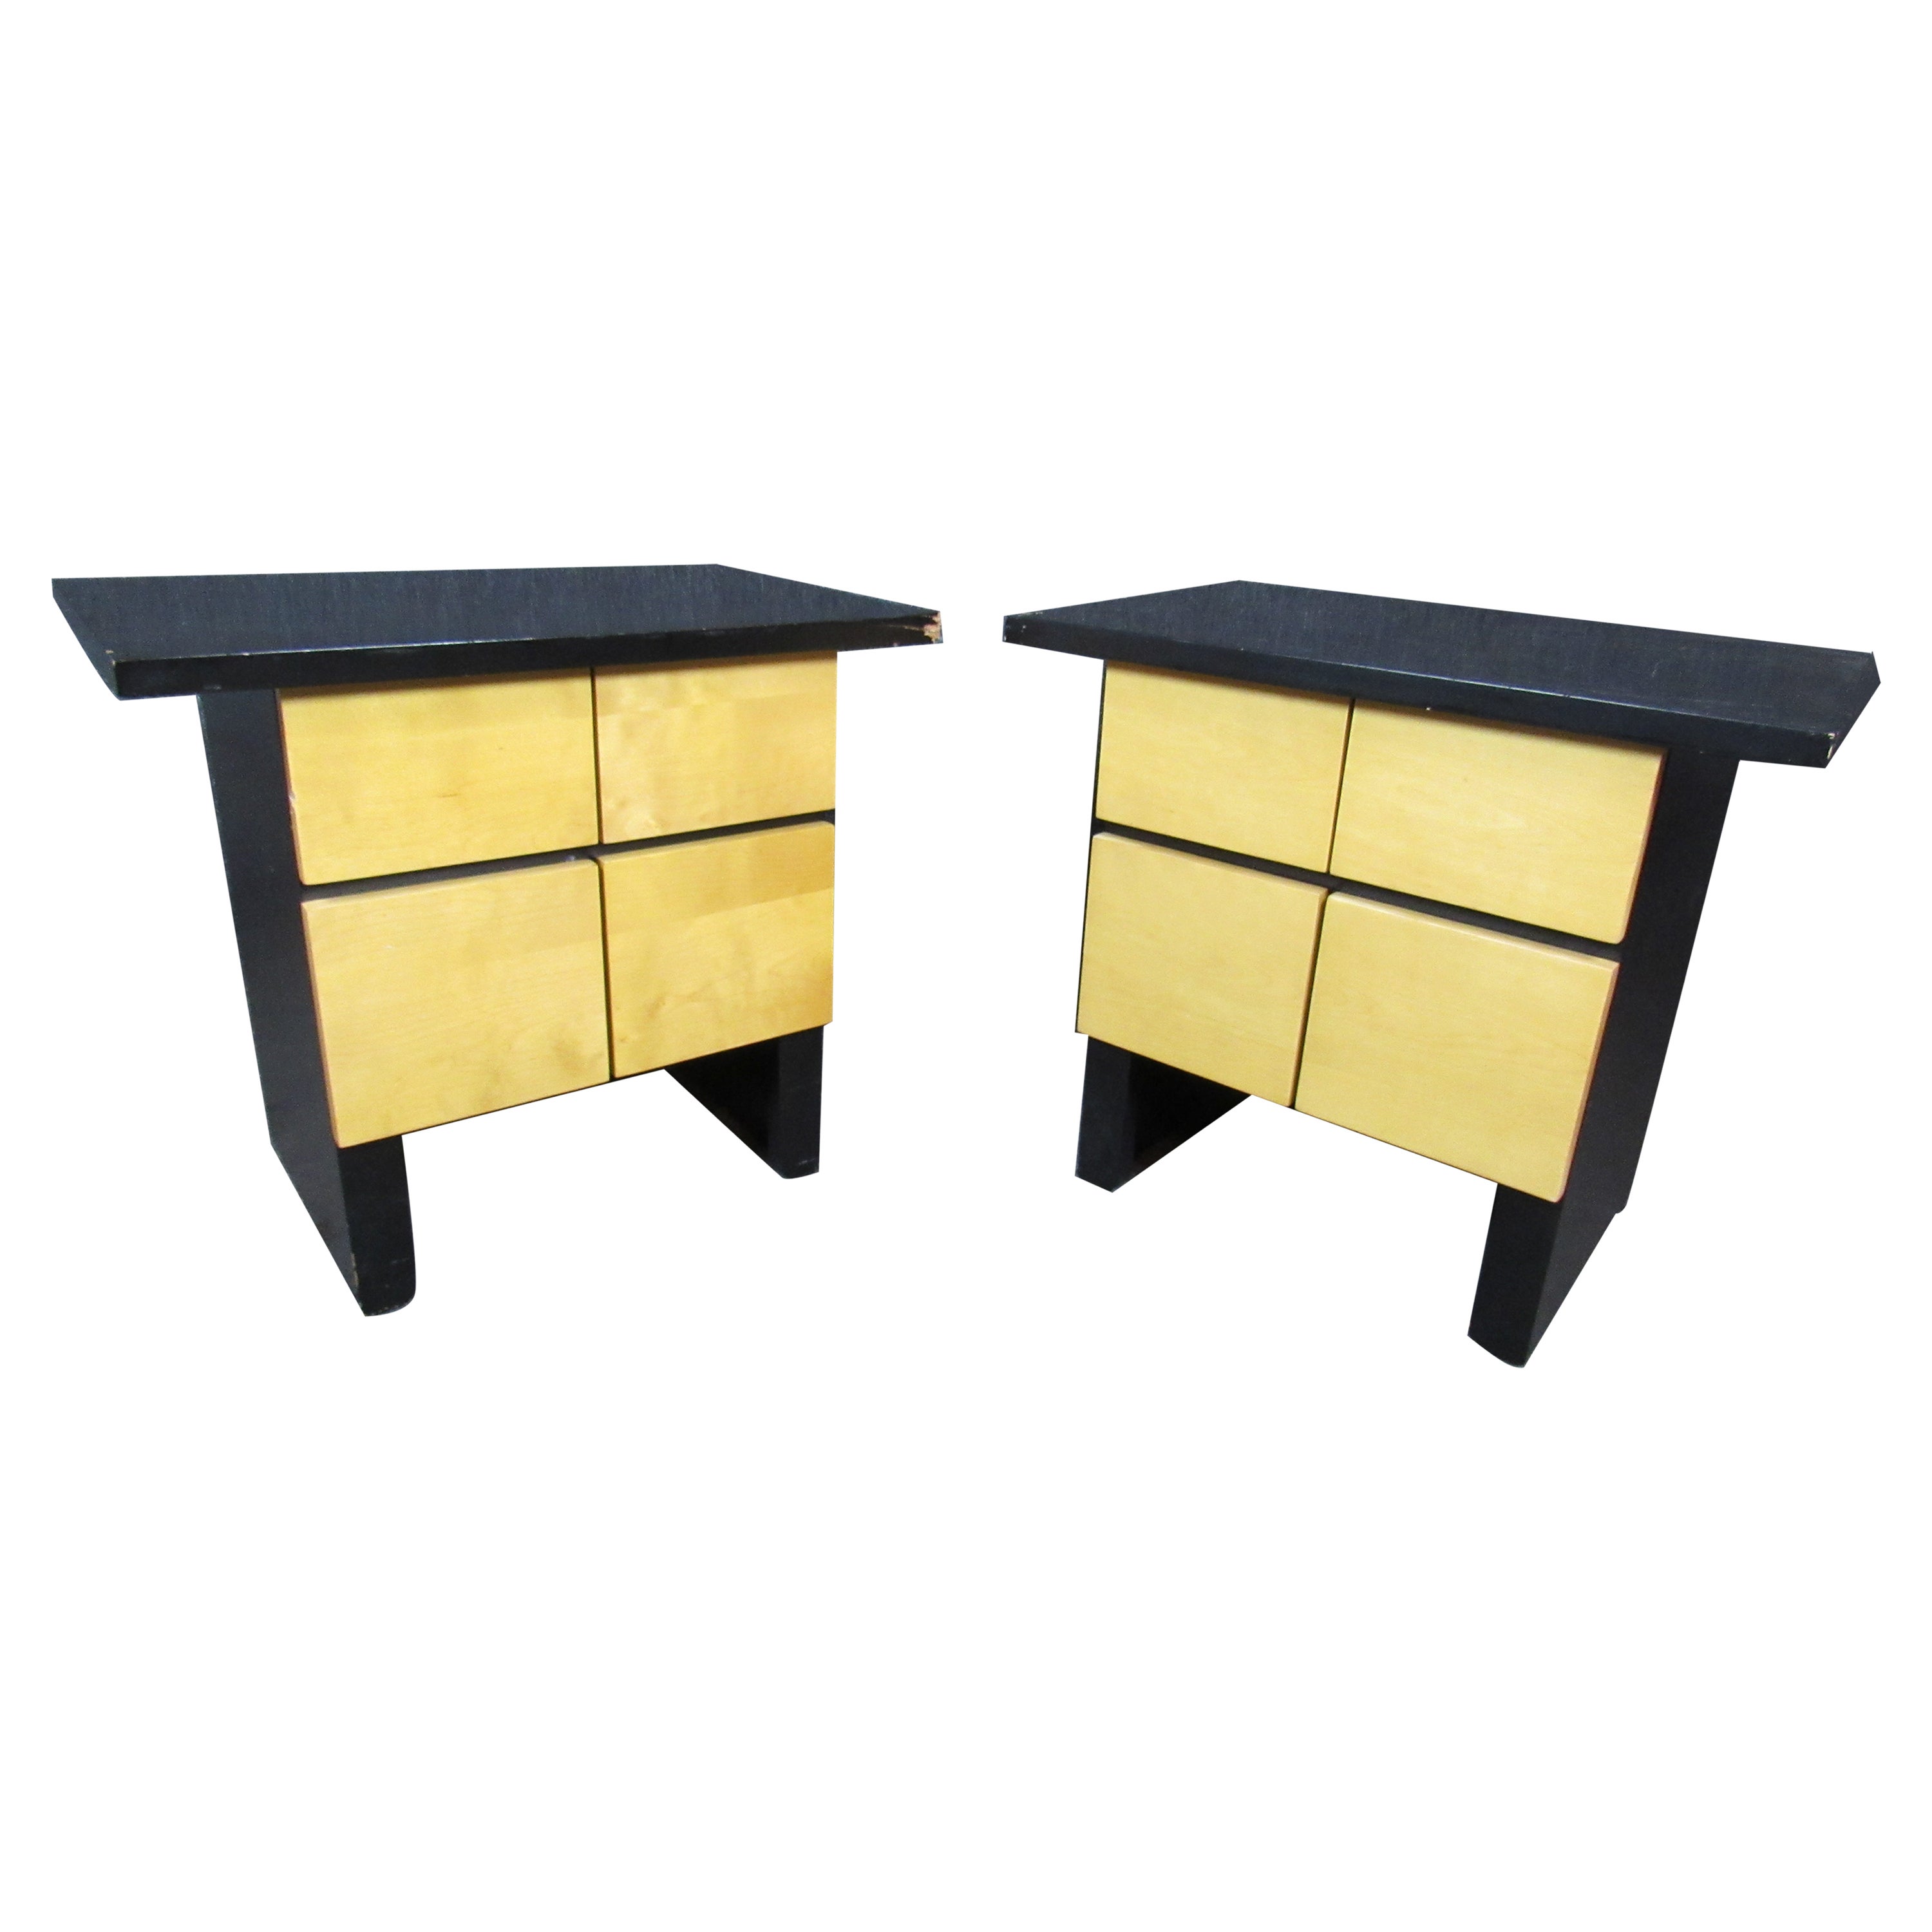 Pair of Minimalist Black Lacquer Nightstands